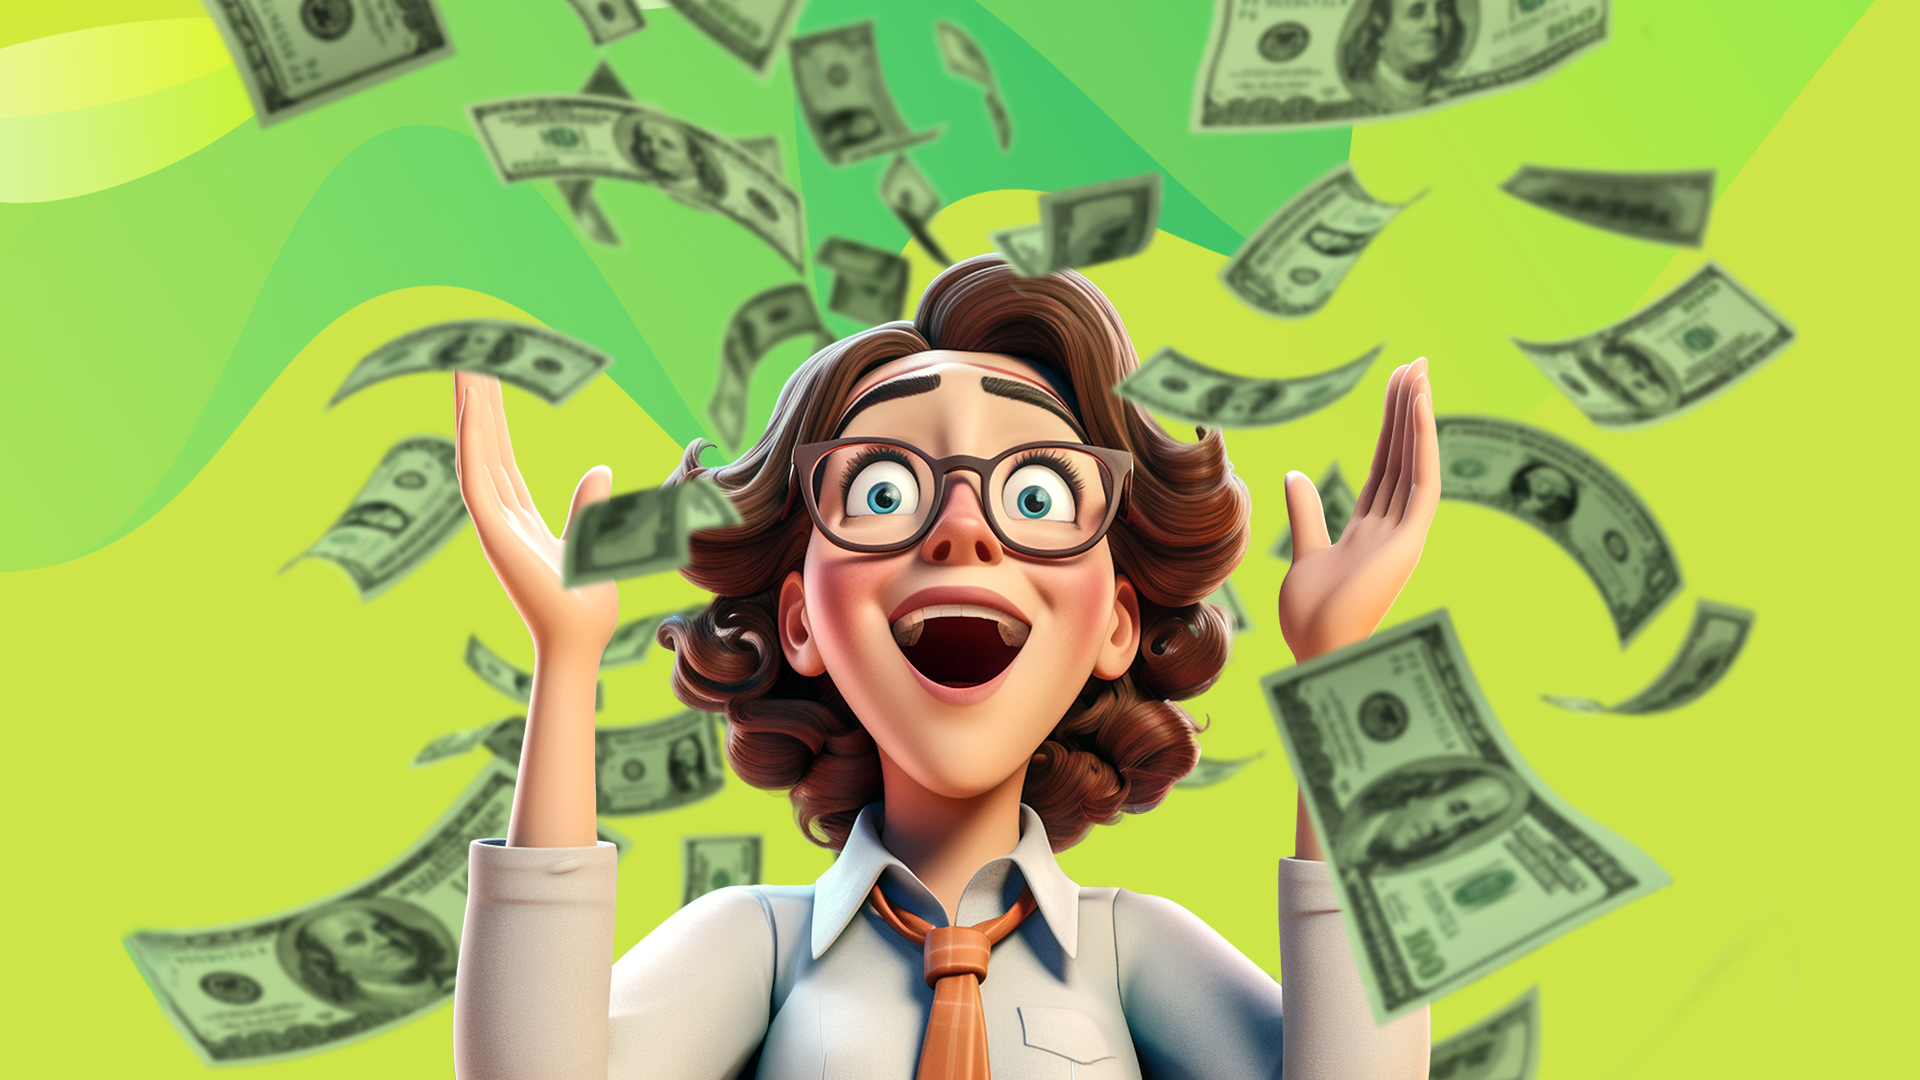 A cartoon woman wearing glasses looks up in wonder as 100-dollar bills float around her on a light green background.